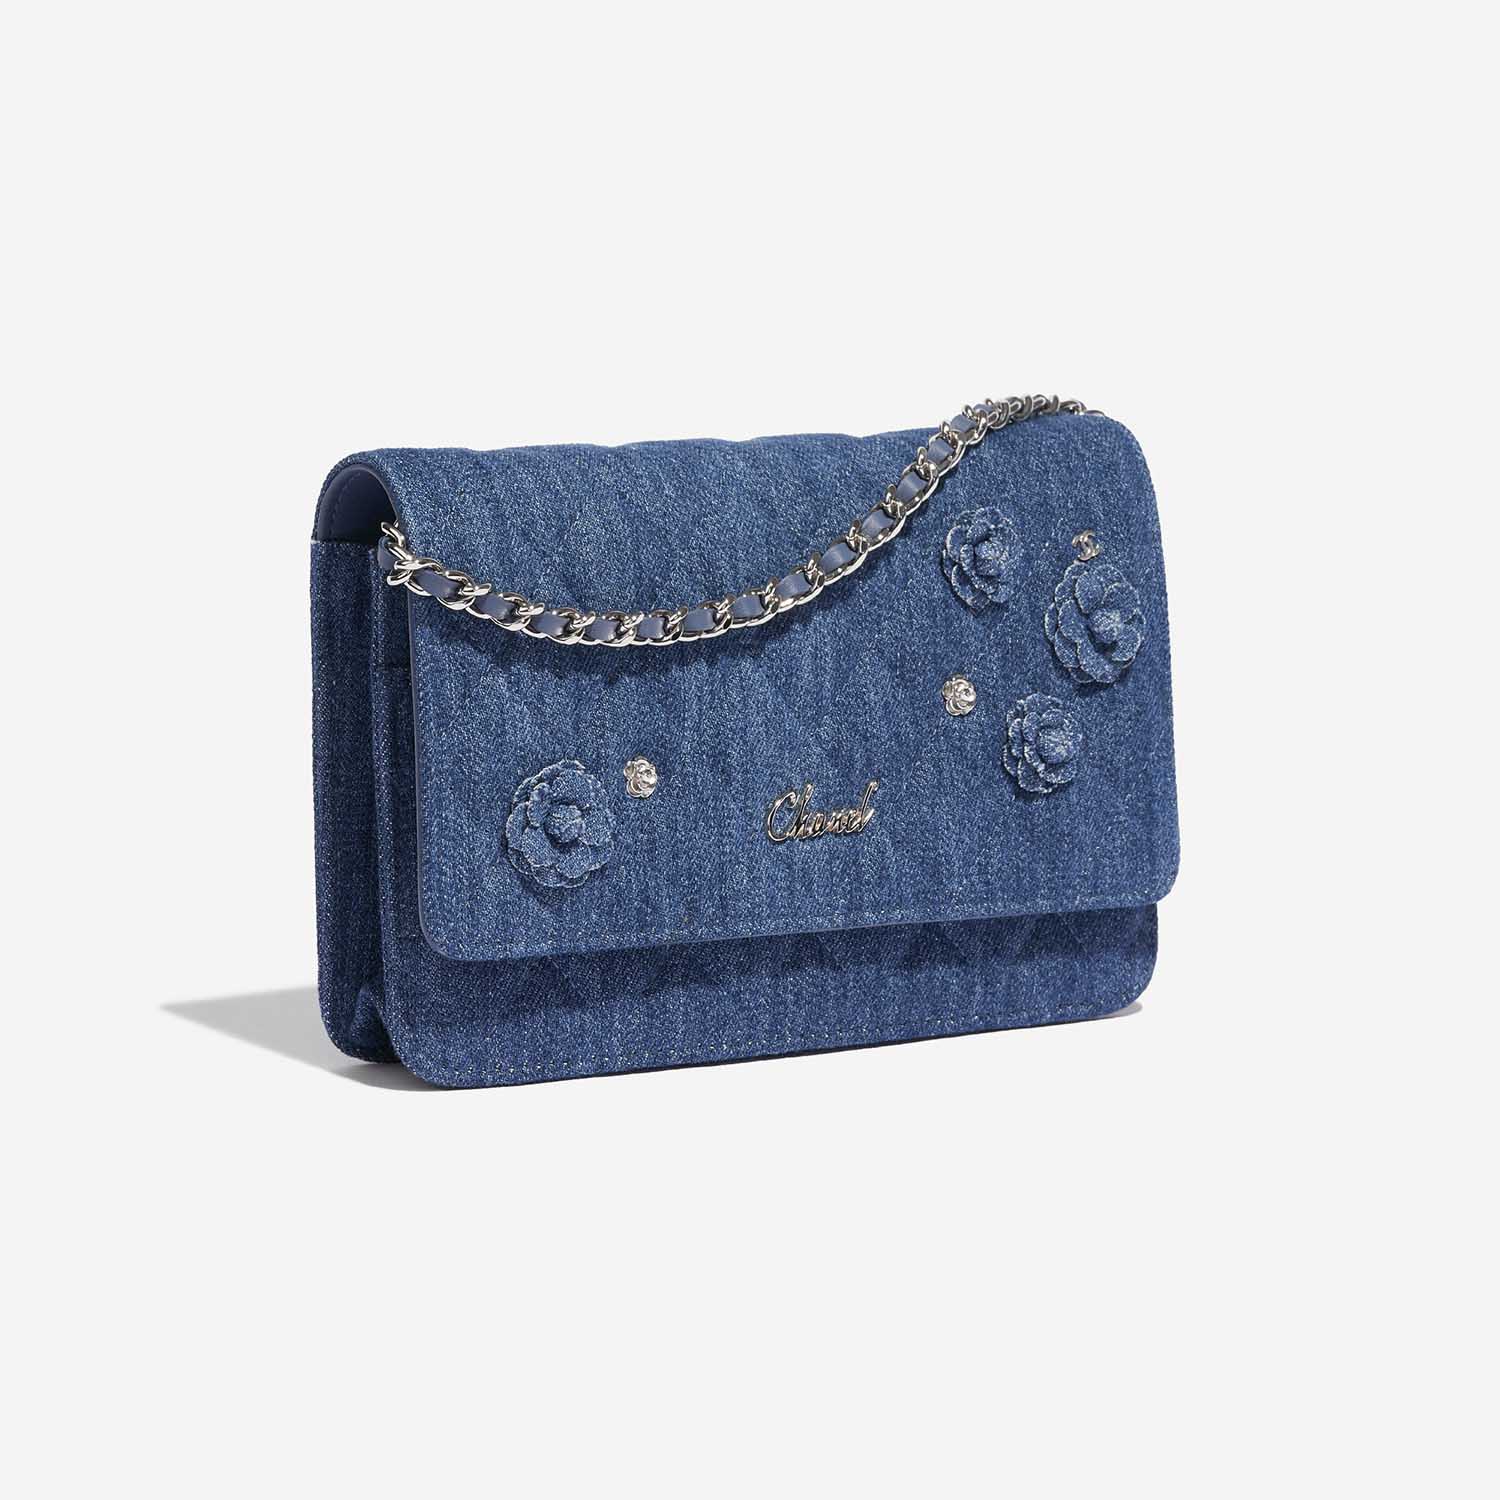 Chanel Wallet on Chain WOC Denim Blue Jeans with camellias - the